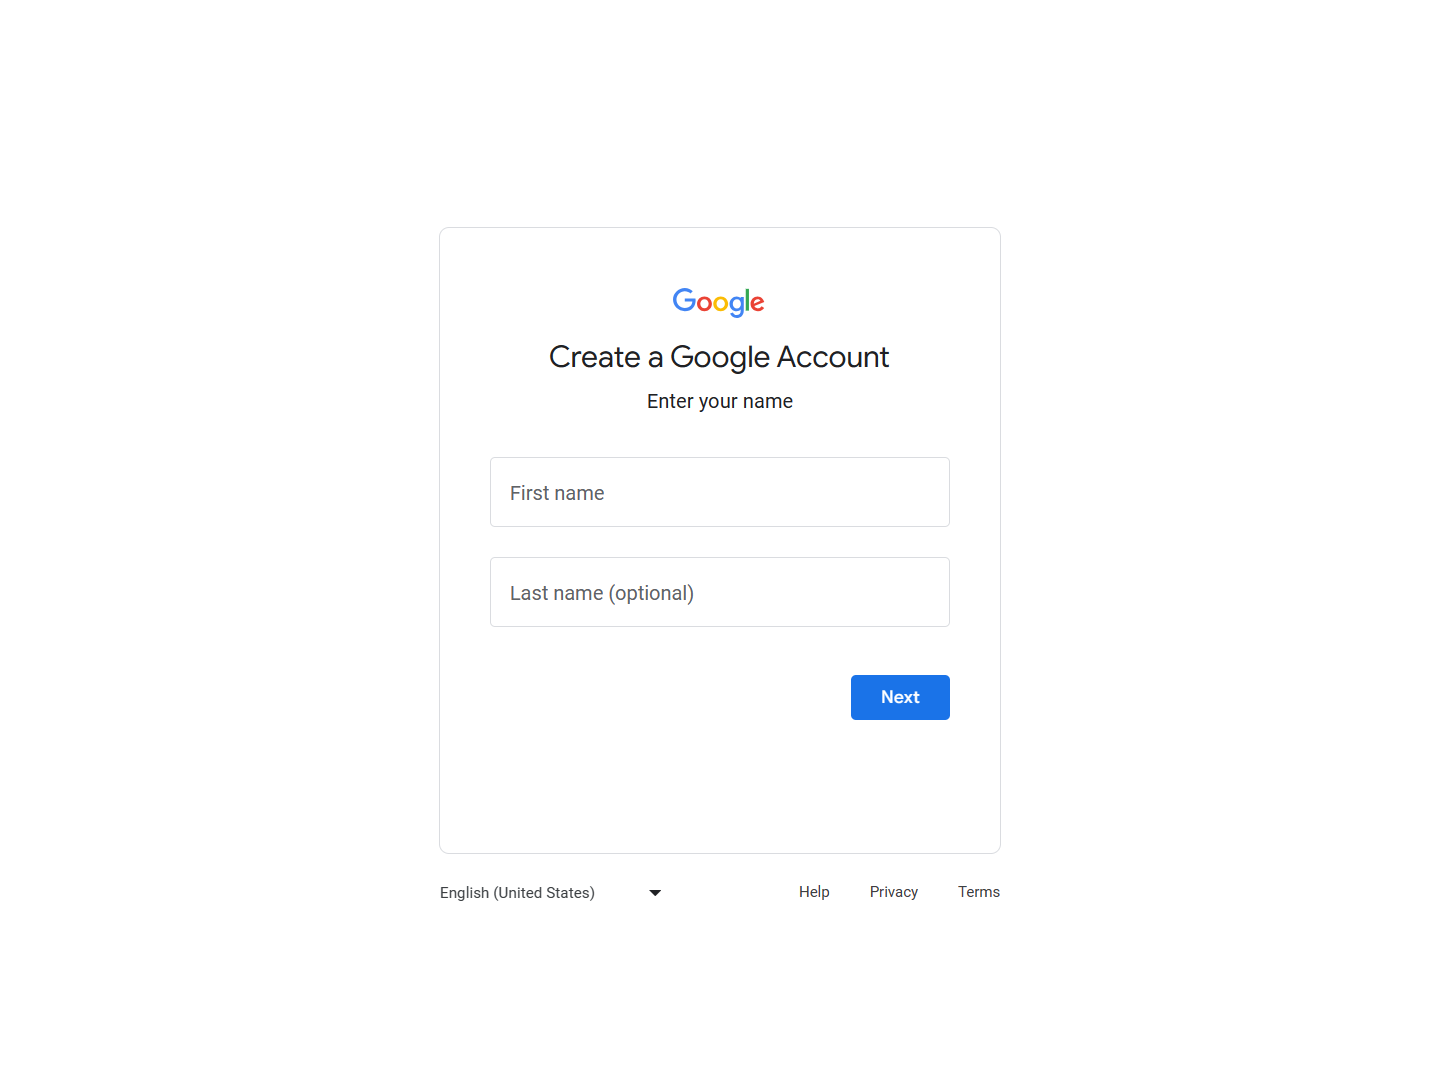 Entering your name for Gmail account creation